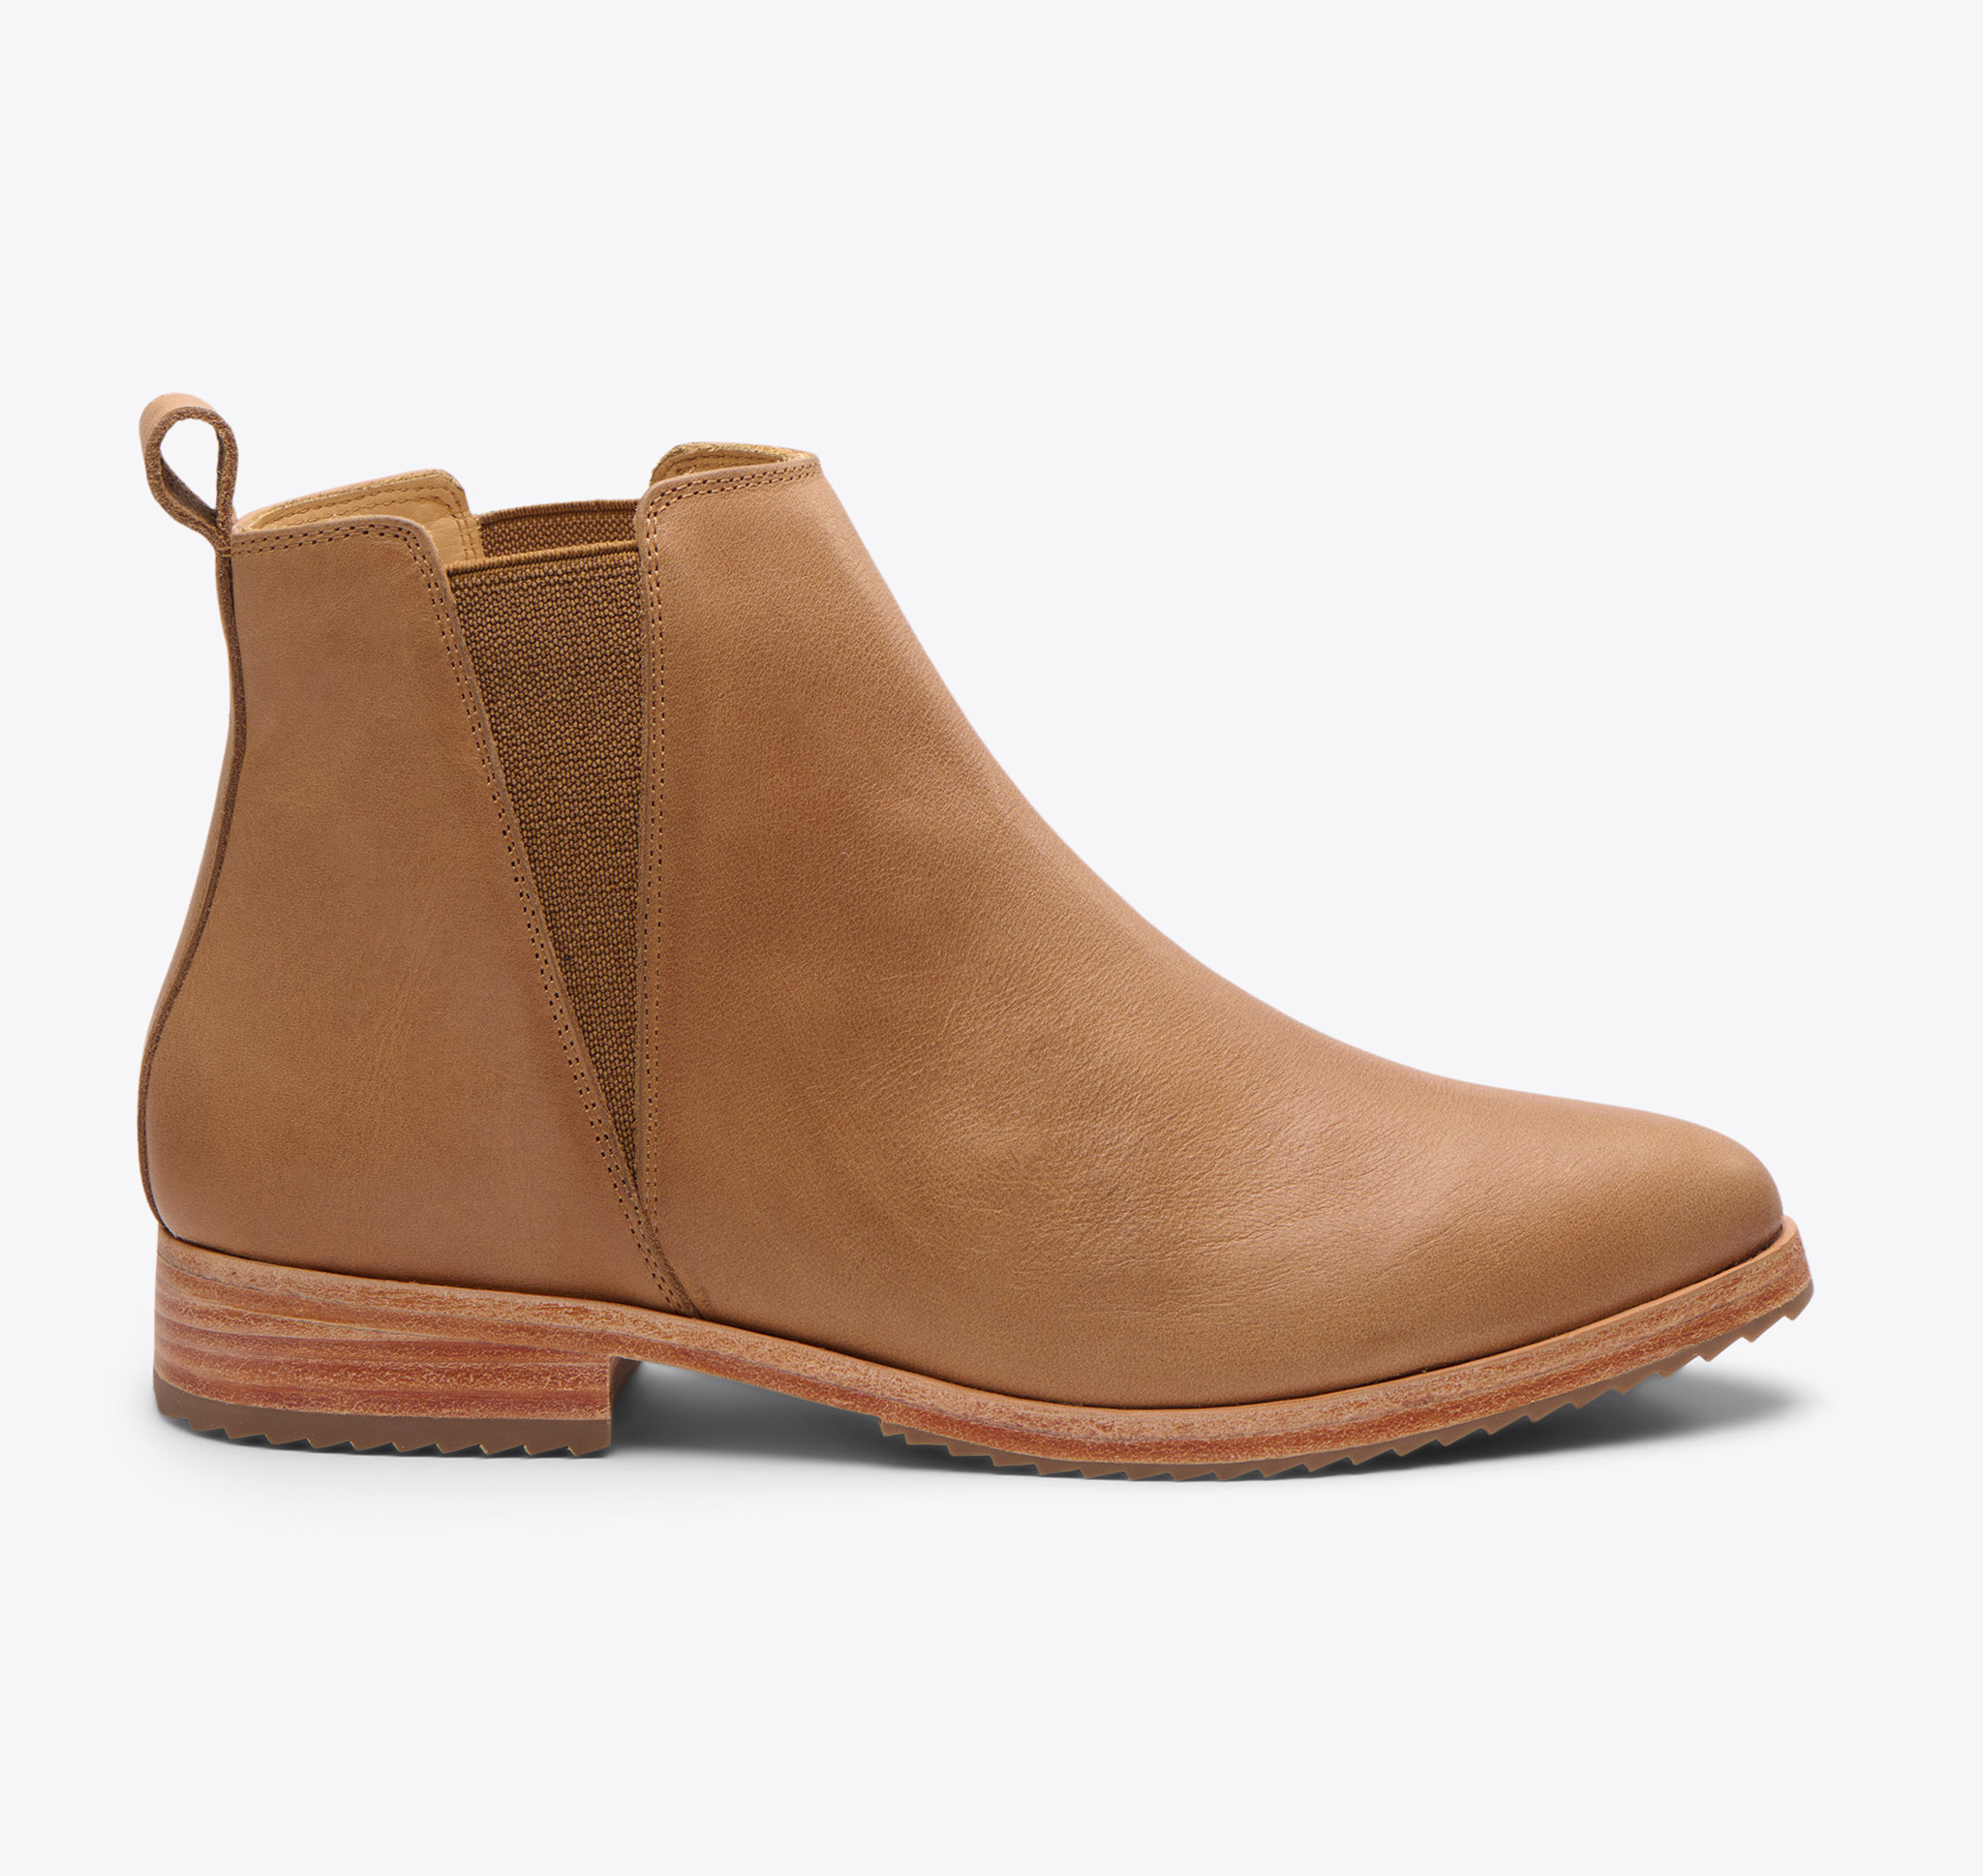 Nisolo Everyday Chelsea Boot Almond - Every Nisolo product is built on the foundation of comfort, function, and design. 